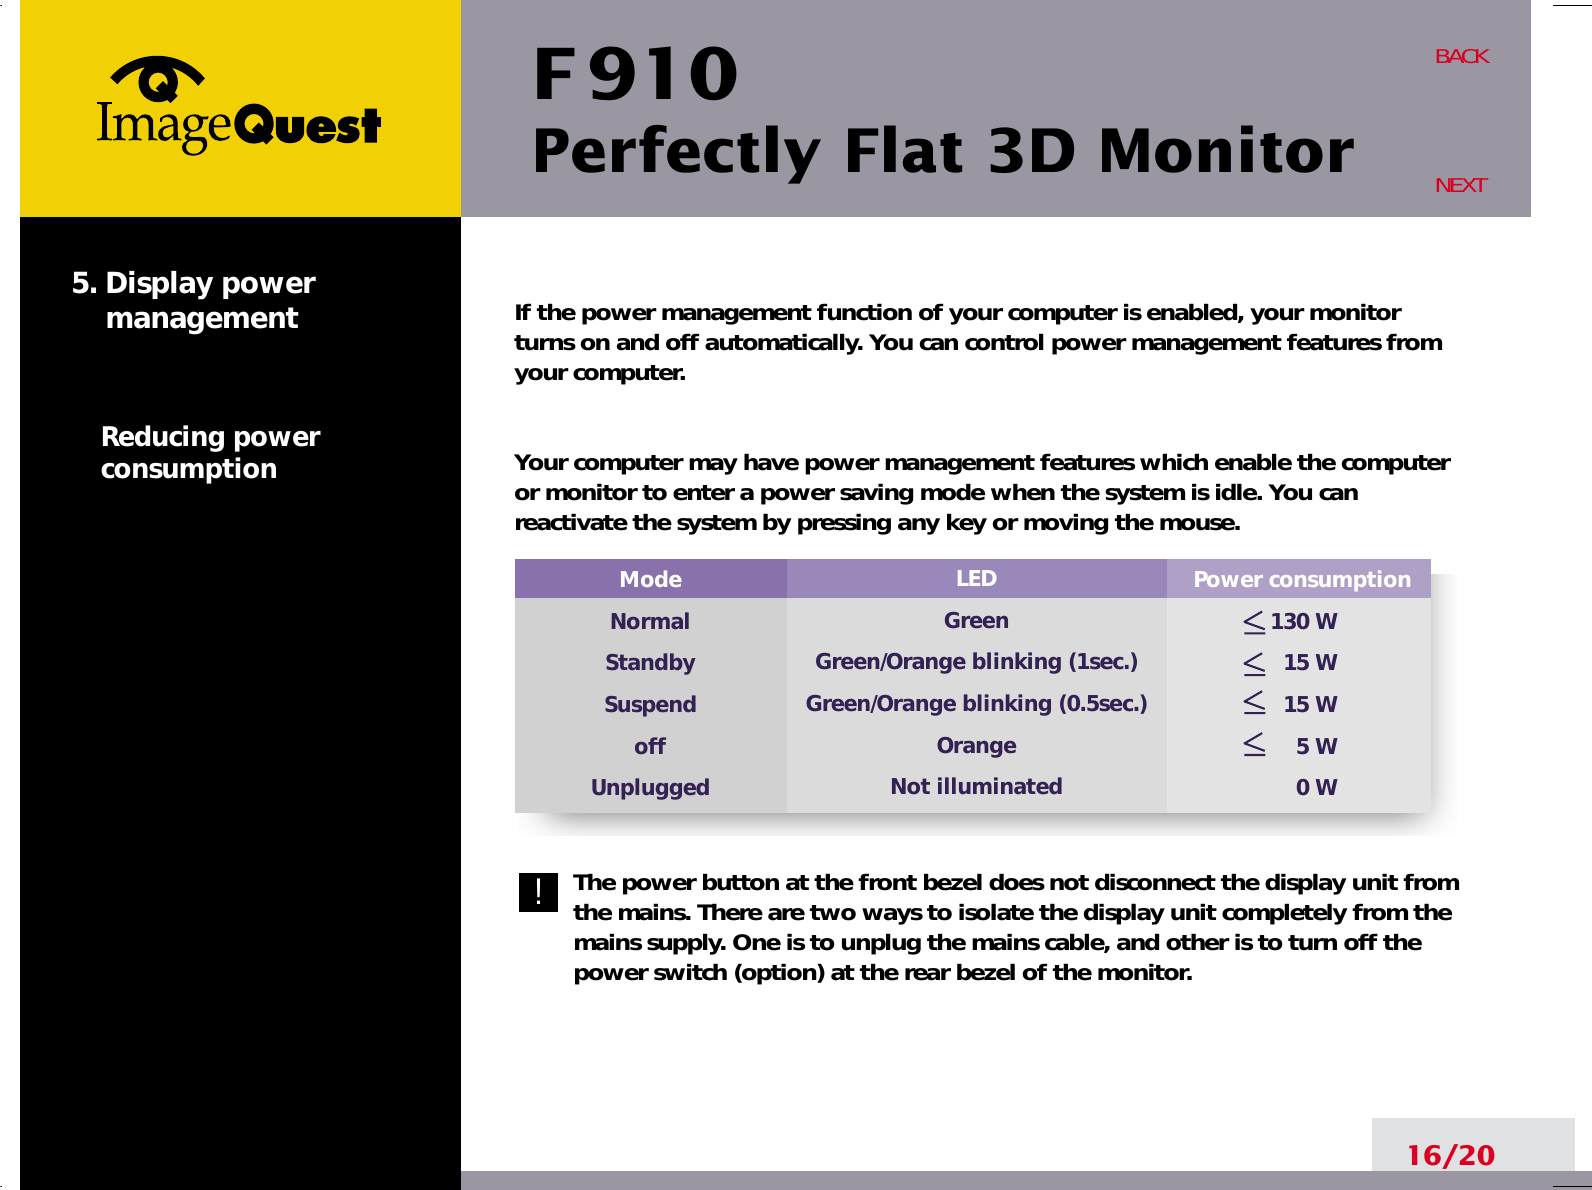 F 910Perfectly Flat 3D Monitor16/20BACKNEXTIf the power management function of your computer is enabled, your monitorturns on and off automatically. You can control power management features fromyour computer.Your computer may have power management features which enable the computeror monitor to enter a power saving mode when the system is idle. You canreactivate the system by pressing any key or moving the mouse.The power button at the front bezel does not disconnect the display unit fromthe mains. There are two ways to isolate the display unit completely from themains supply. One is to unplug the mains cable, and other is to turn off thepower switch (option) at the rear bezel of the monitor.Power consumption130 W15 W15 W5 W0 WModeNormalStandbySuspendoffUnplugged5. Display powermanagementReducing powerconsumption!LEDGreenGreen/Orange blinking (1sec.)Green/Orange blinking (0.5sec.)OrangeNot illuminated